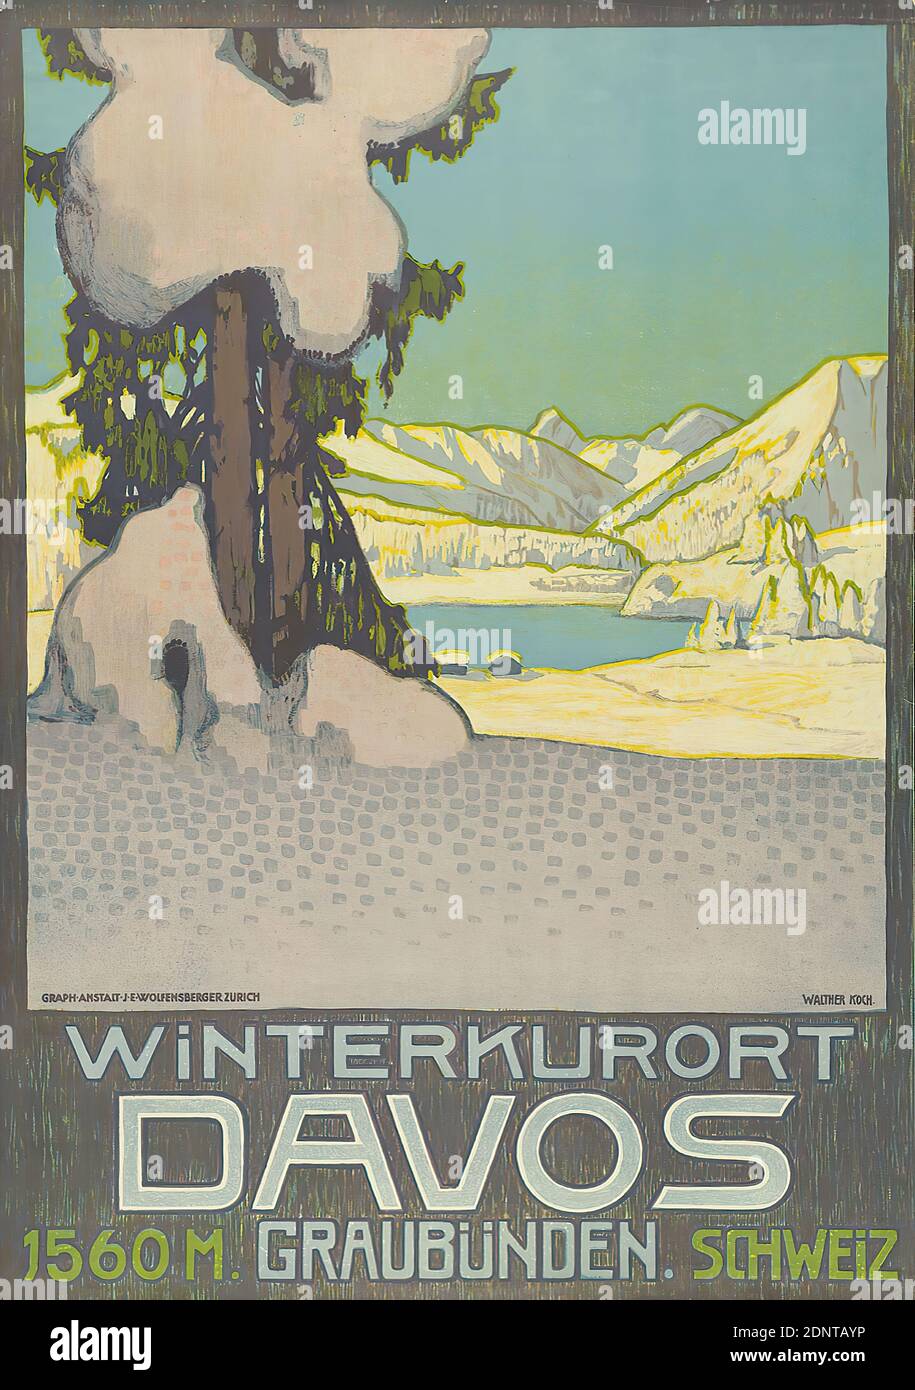 Graph. Institution J. E. Wolfensberger, Walther Koch, winter health resort Davos, 1560 m Graubünden, Switzerland, paper, lithography, total: height: 98,6 cm; width: 69,4 cm, signed: im Druck u. r. im Motiv: WALTHER KOCH, tourism posters, mountains, mountains, snow, trees, bushes, lake, winter, cure, bathing cure, Davos Stock Photo